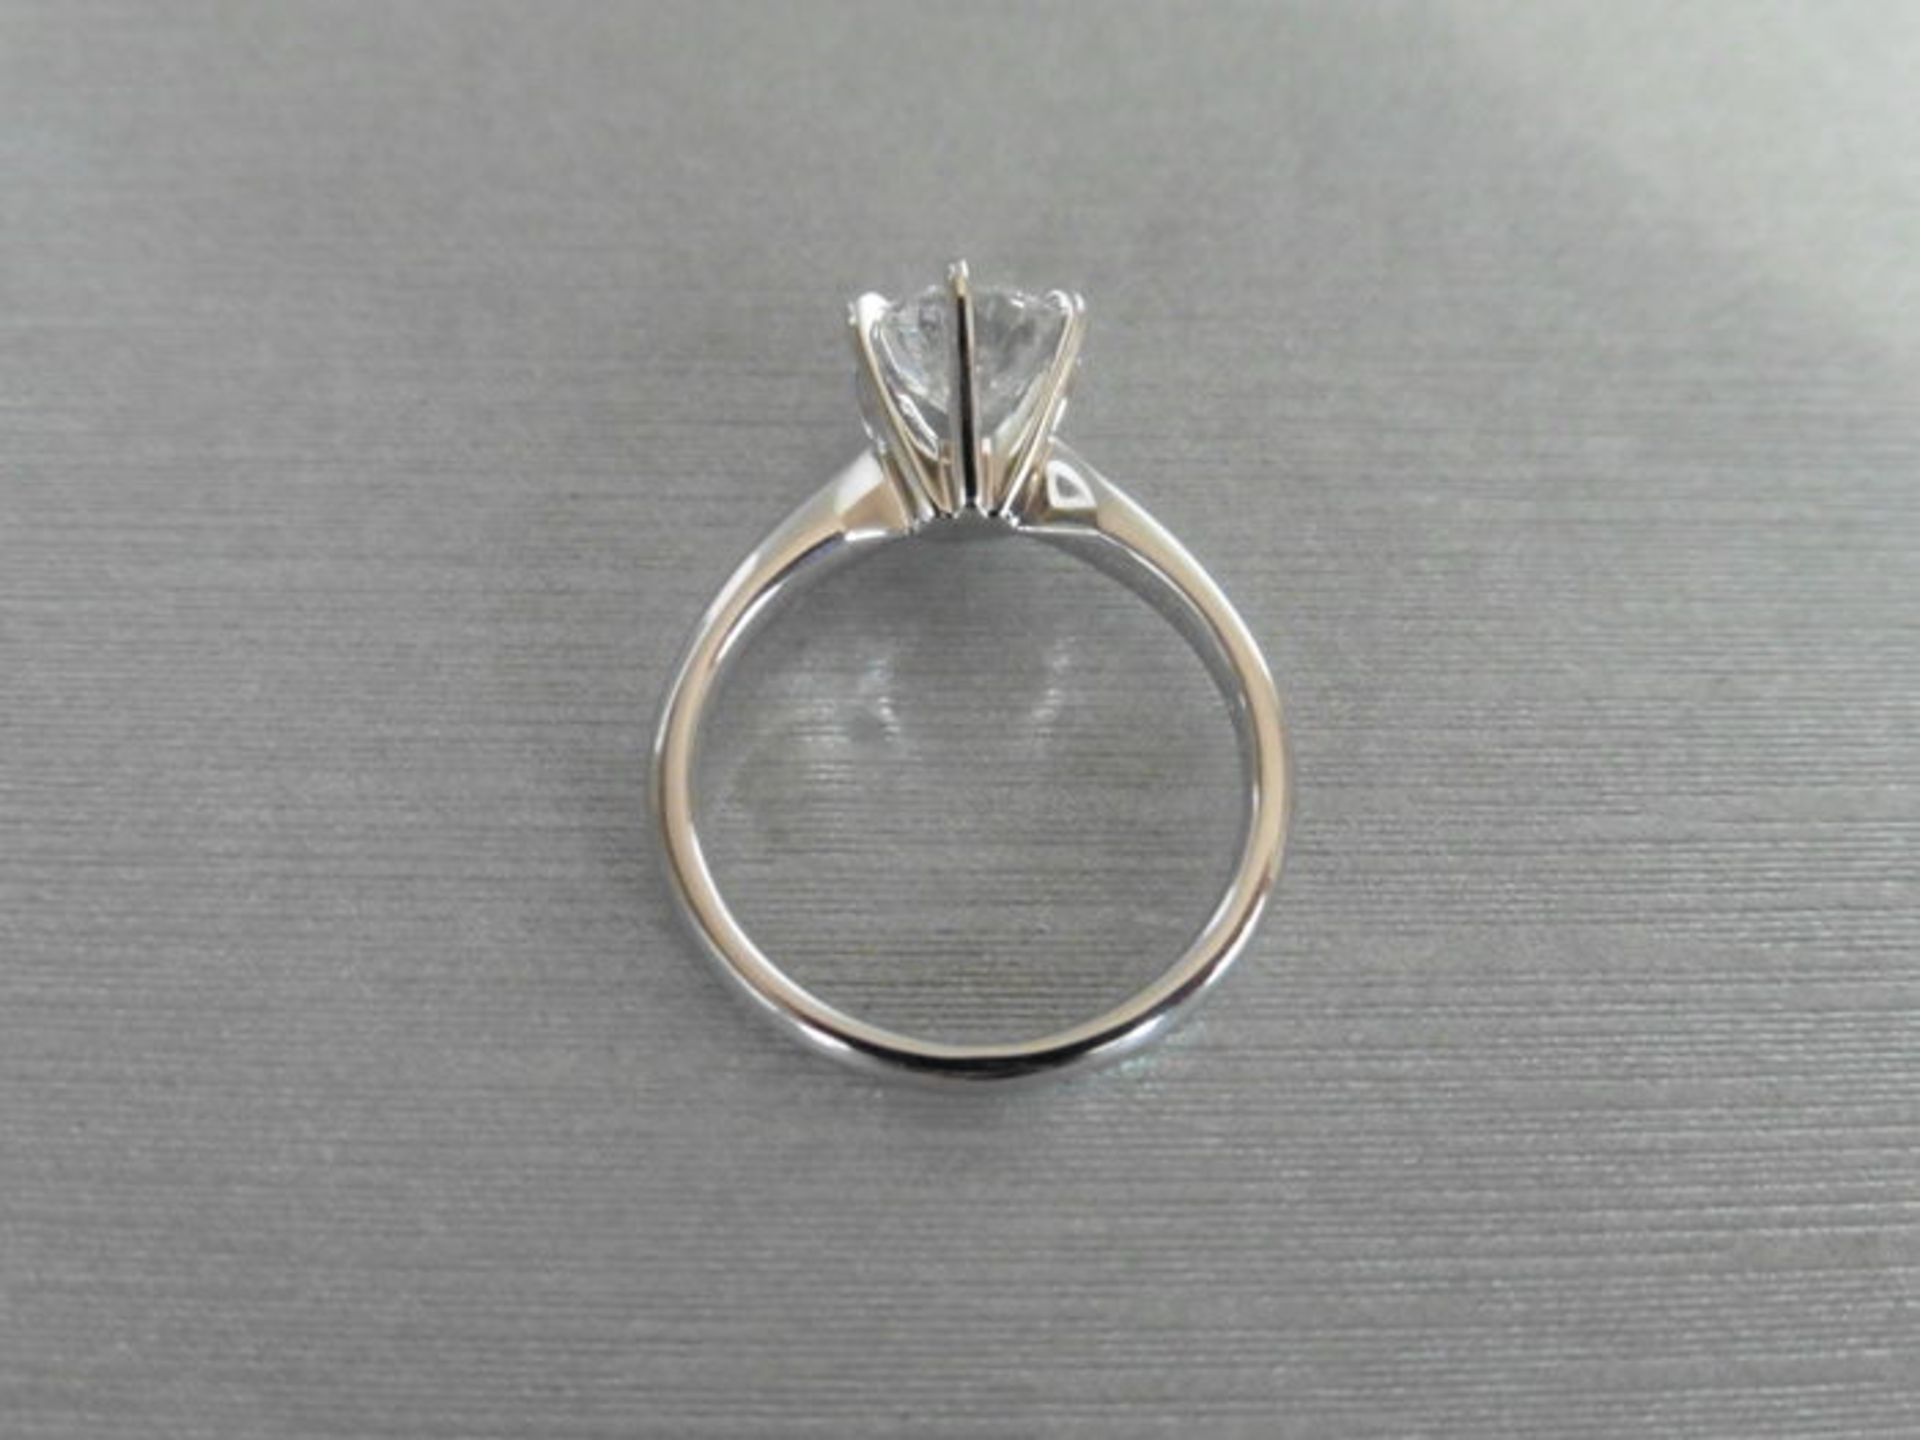 1.01ct diamond solitaire ring set in 18ct white gold. H colour and I1-2 clarity. 6 claw setting, - Image 2 of 3